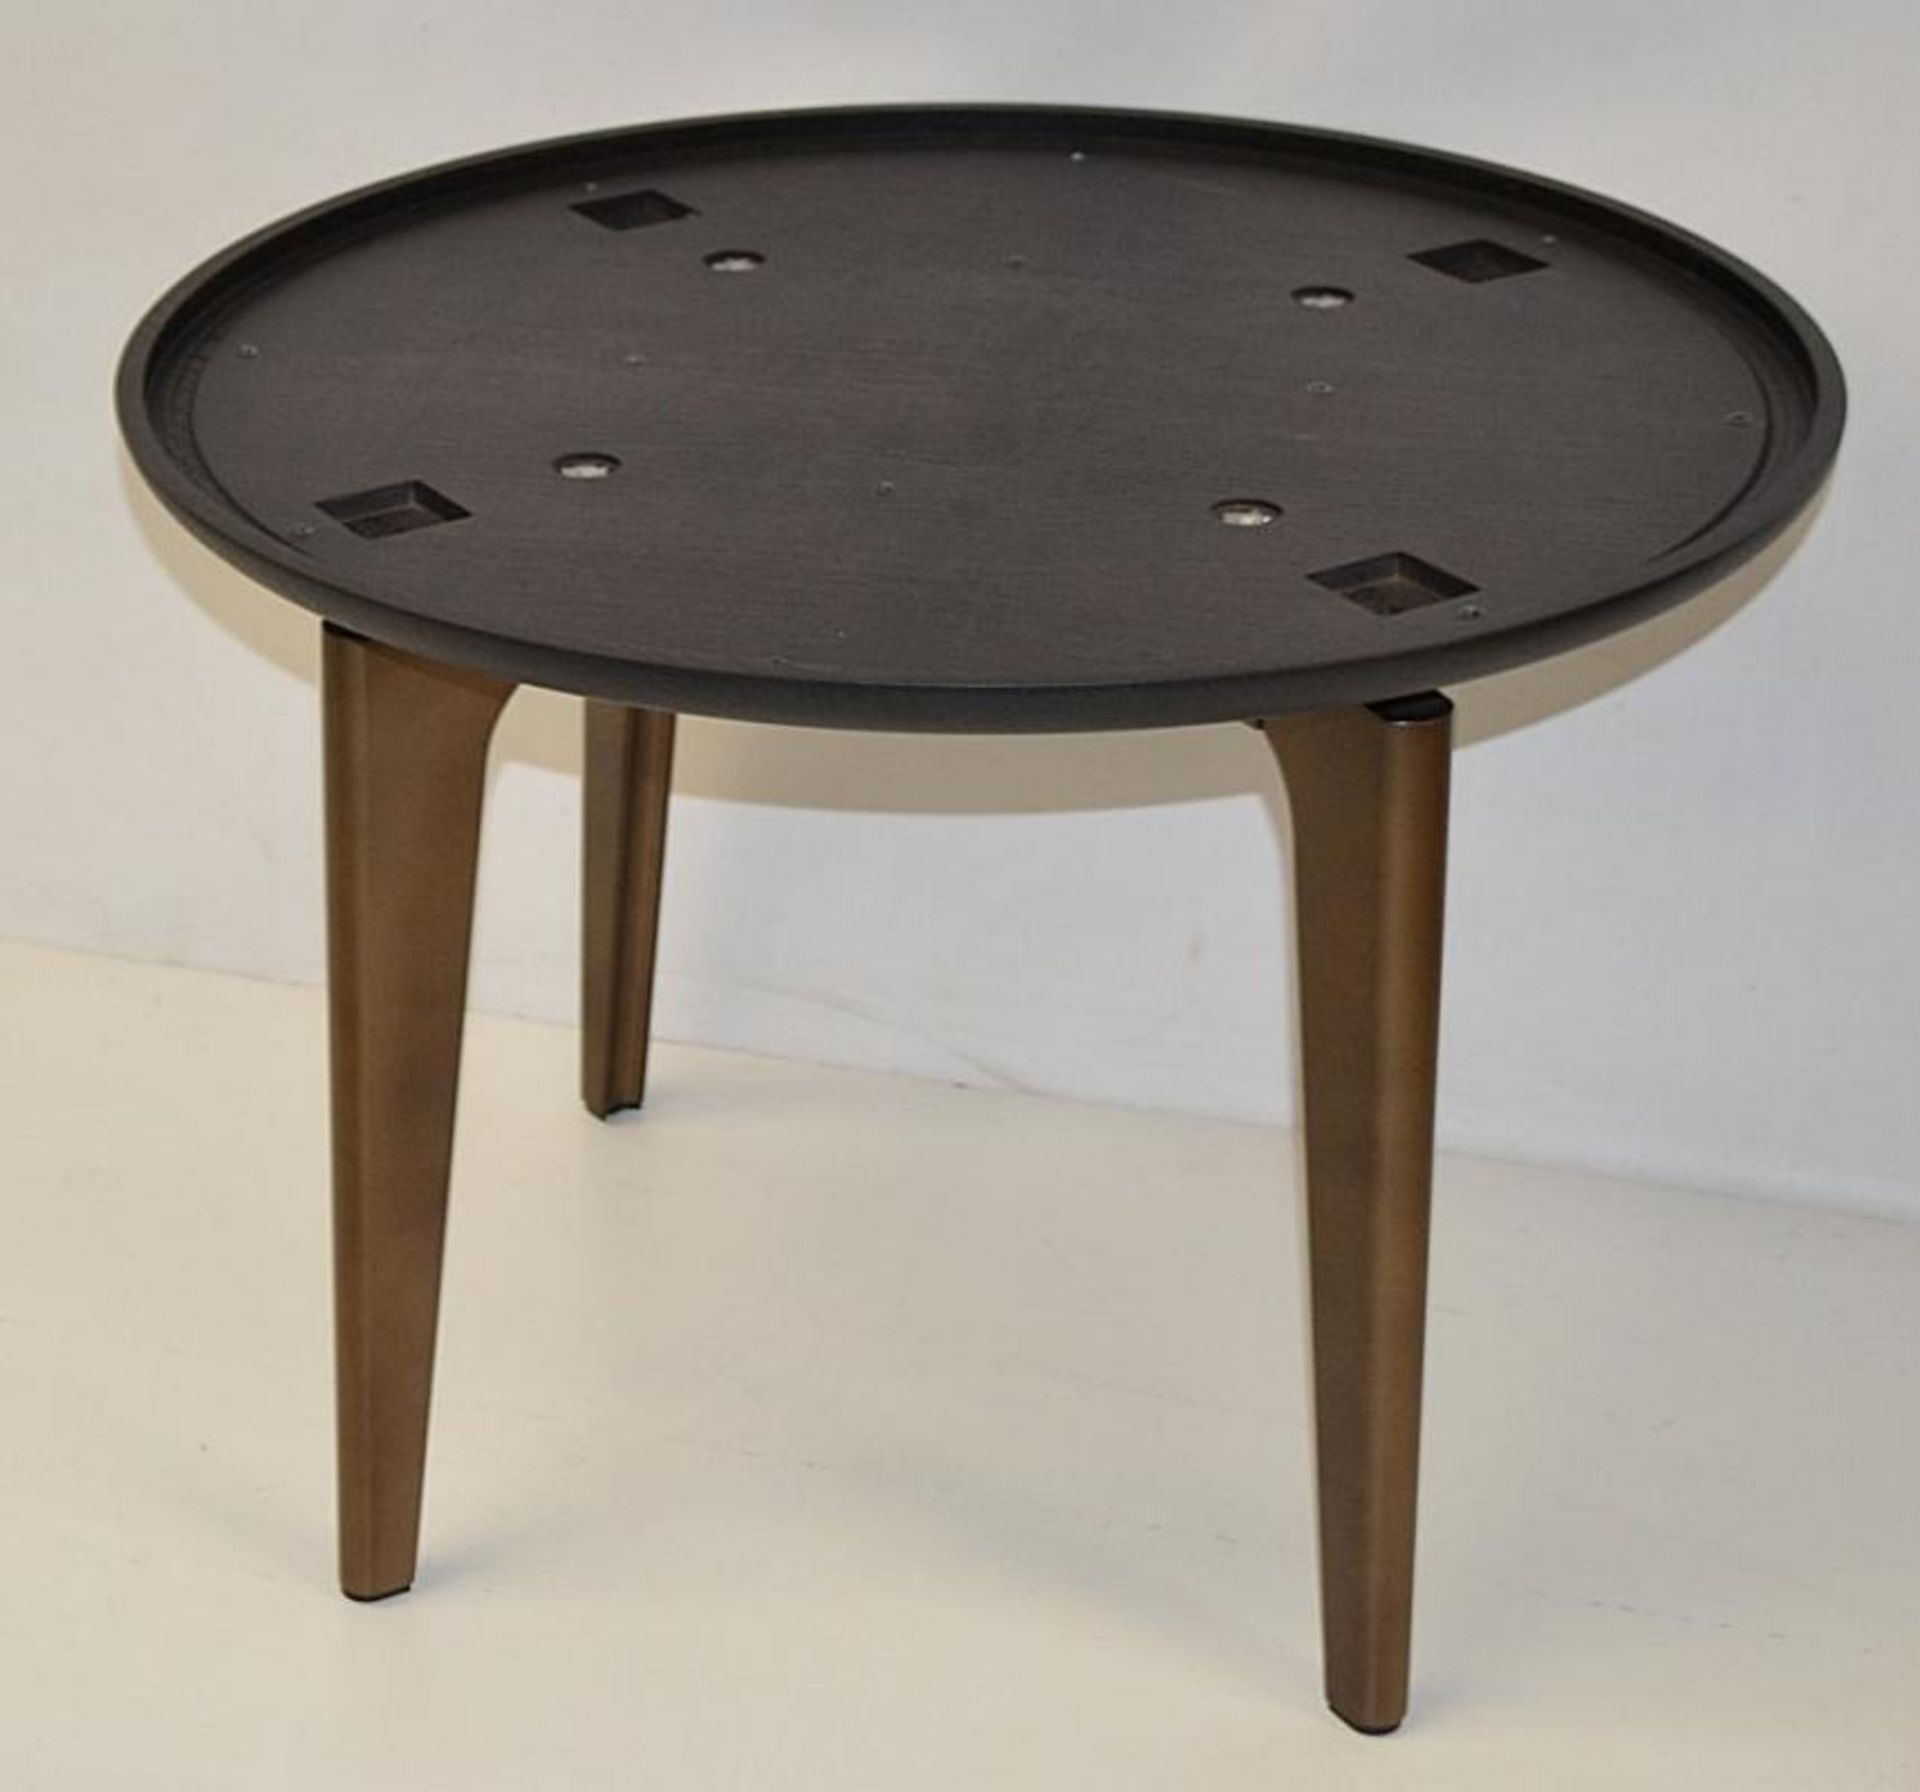 1 x Giorgetti 'Blend' Designer Table With A Bronzed Metal Base - 65cm Diameter - Ref: 5747476 P2/19 - Image 3 of 6